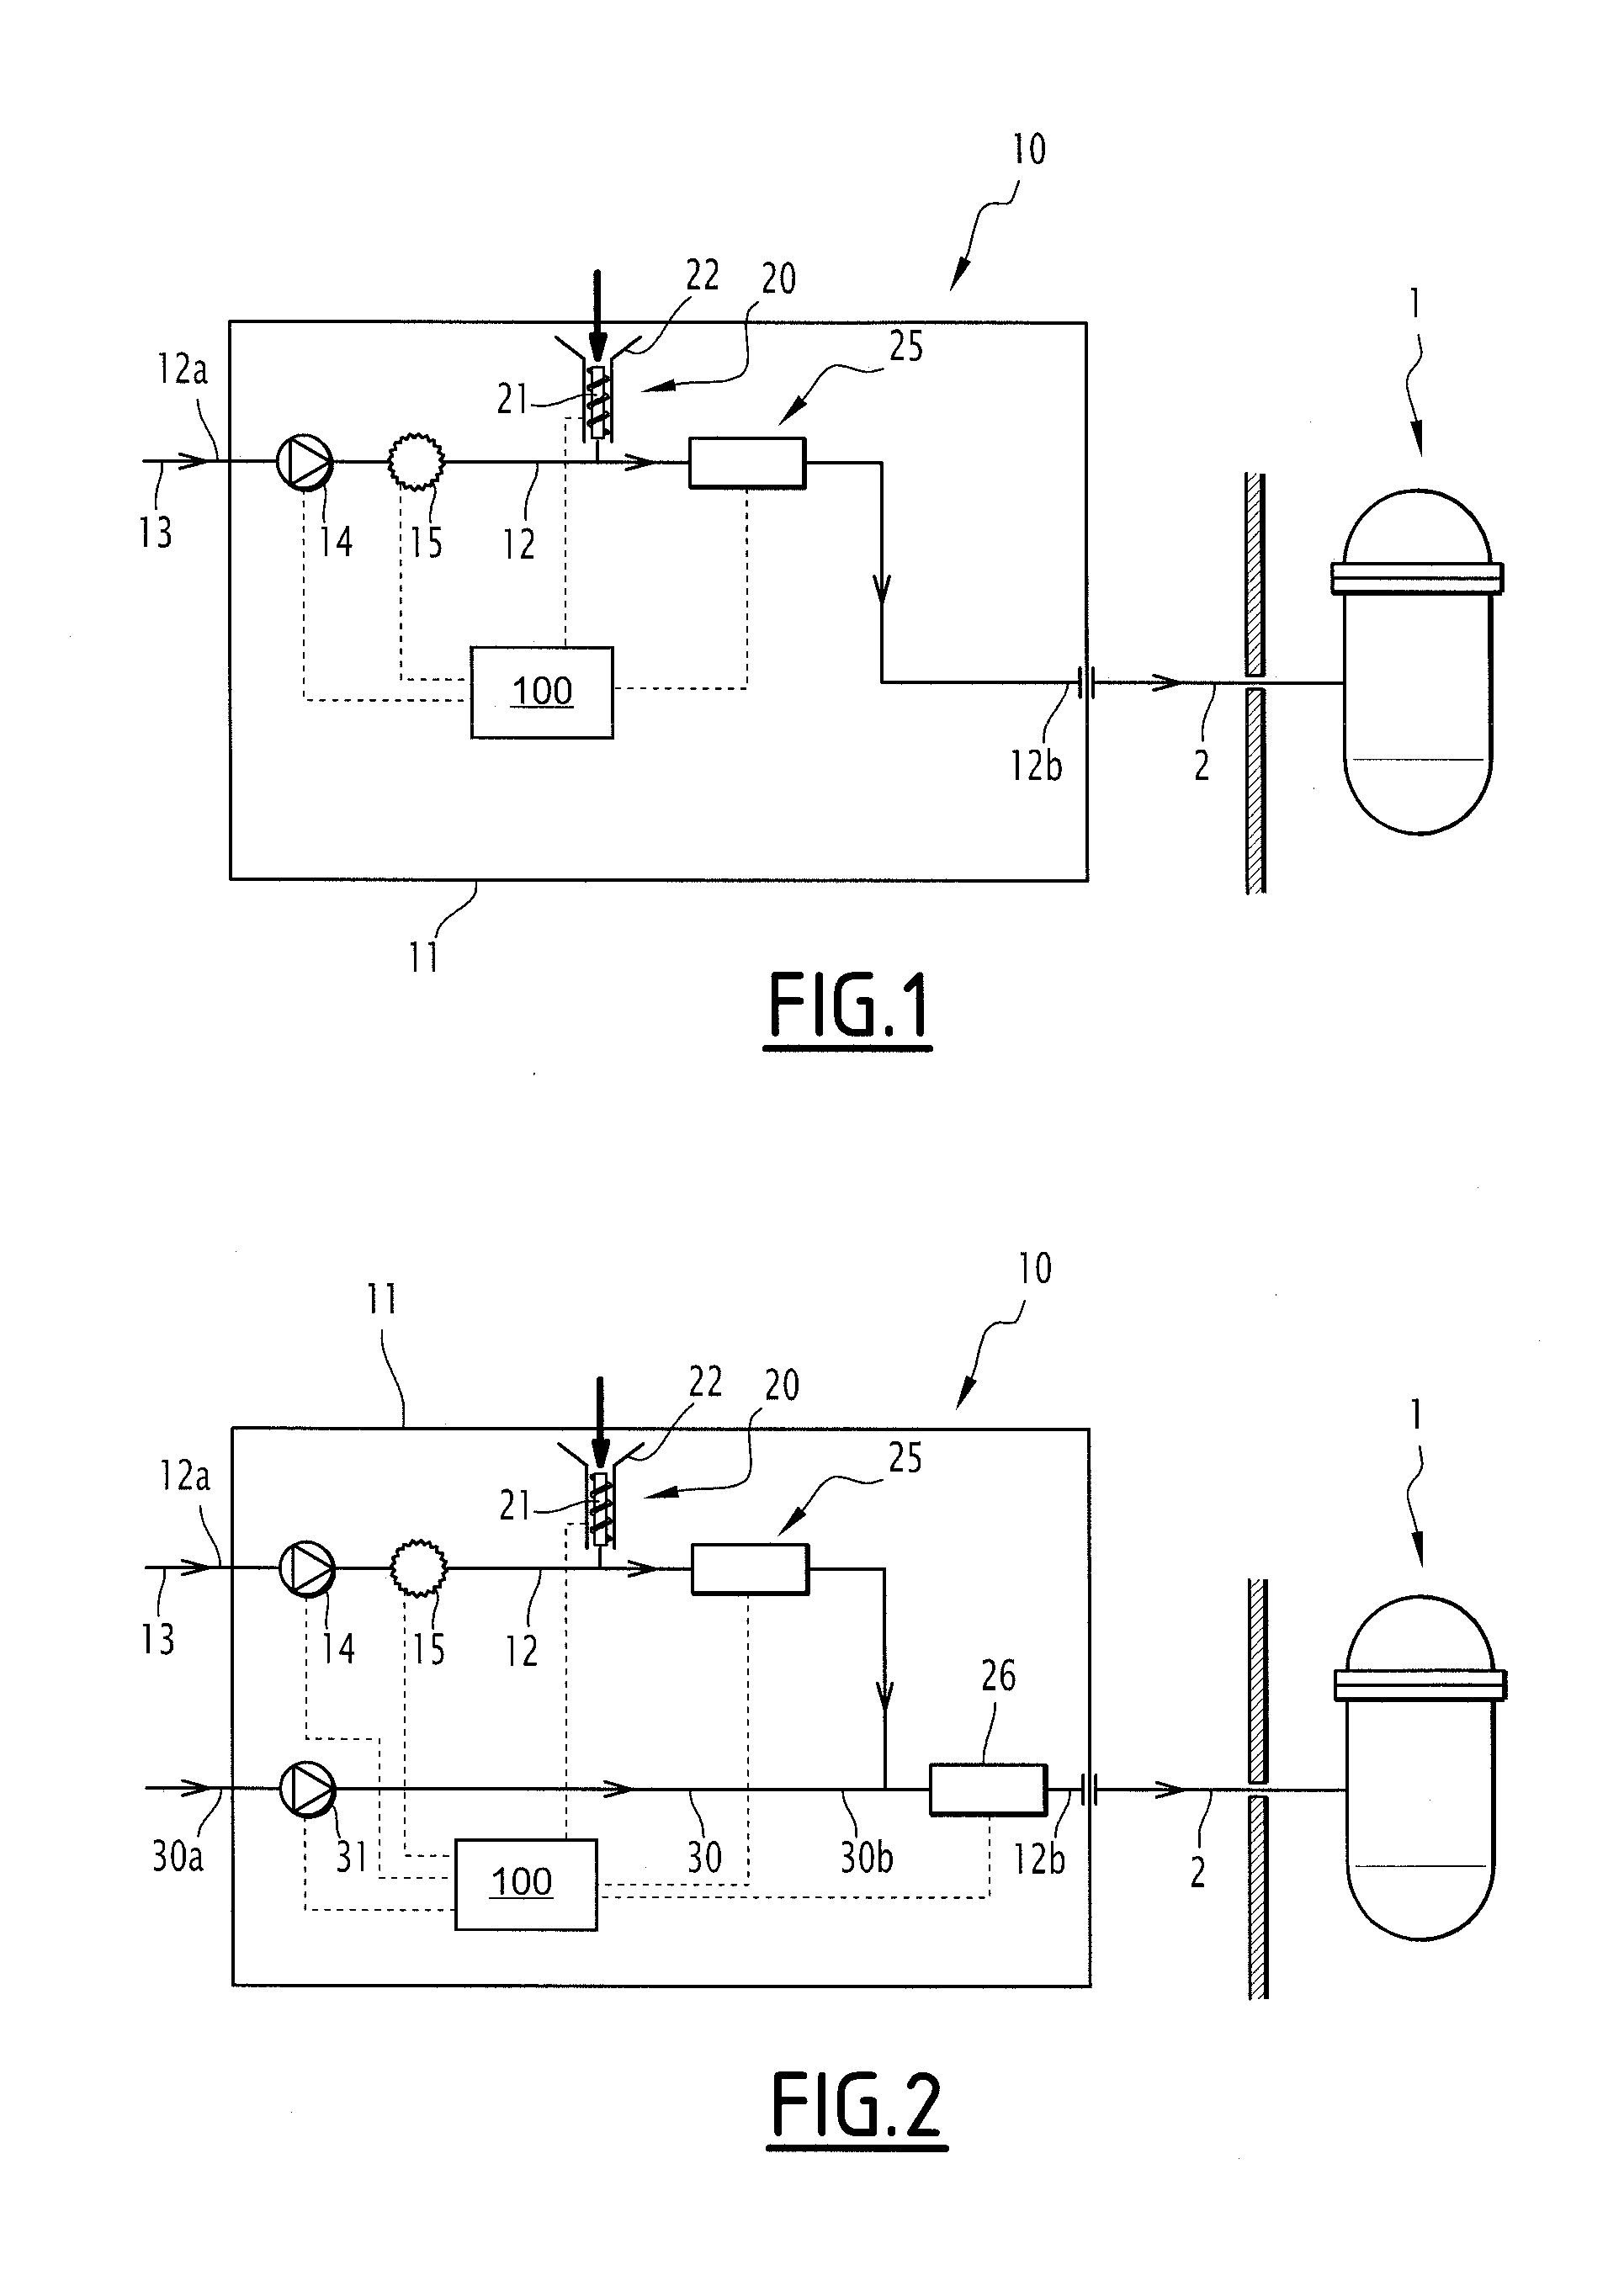 Assembly and method for injecting water containing a neurton-absorbing element to cool a nuclear reactor core in a crisis situation